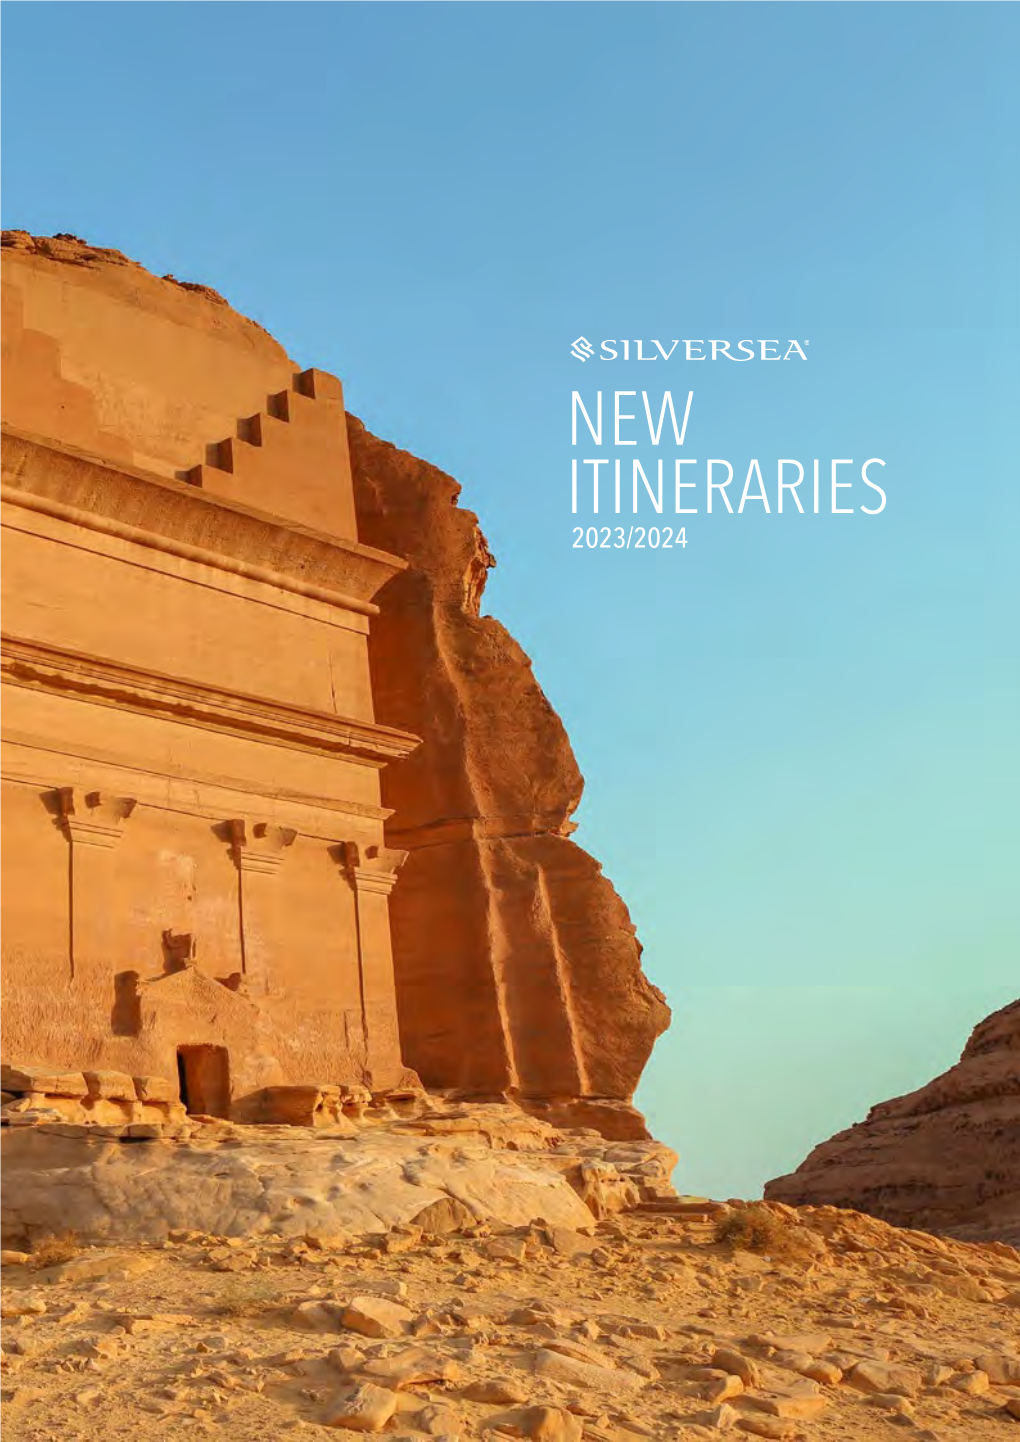 NEW ITINERARIES 2023/2024 Get Ready to Push the Boundaries of Your Travel Farther Than Ever Before, with Our Brand New Collection of Incredible Voyages